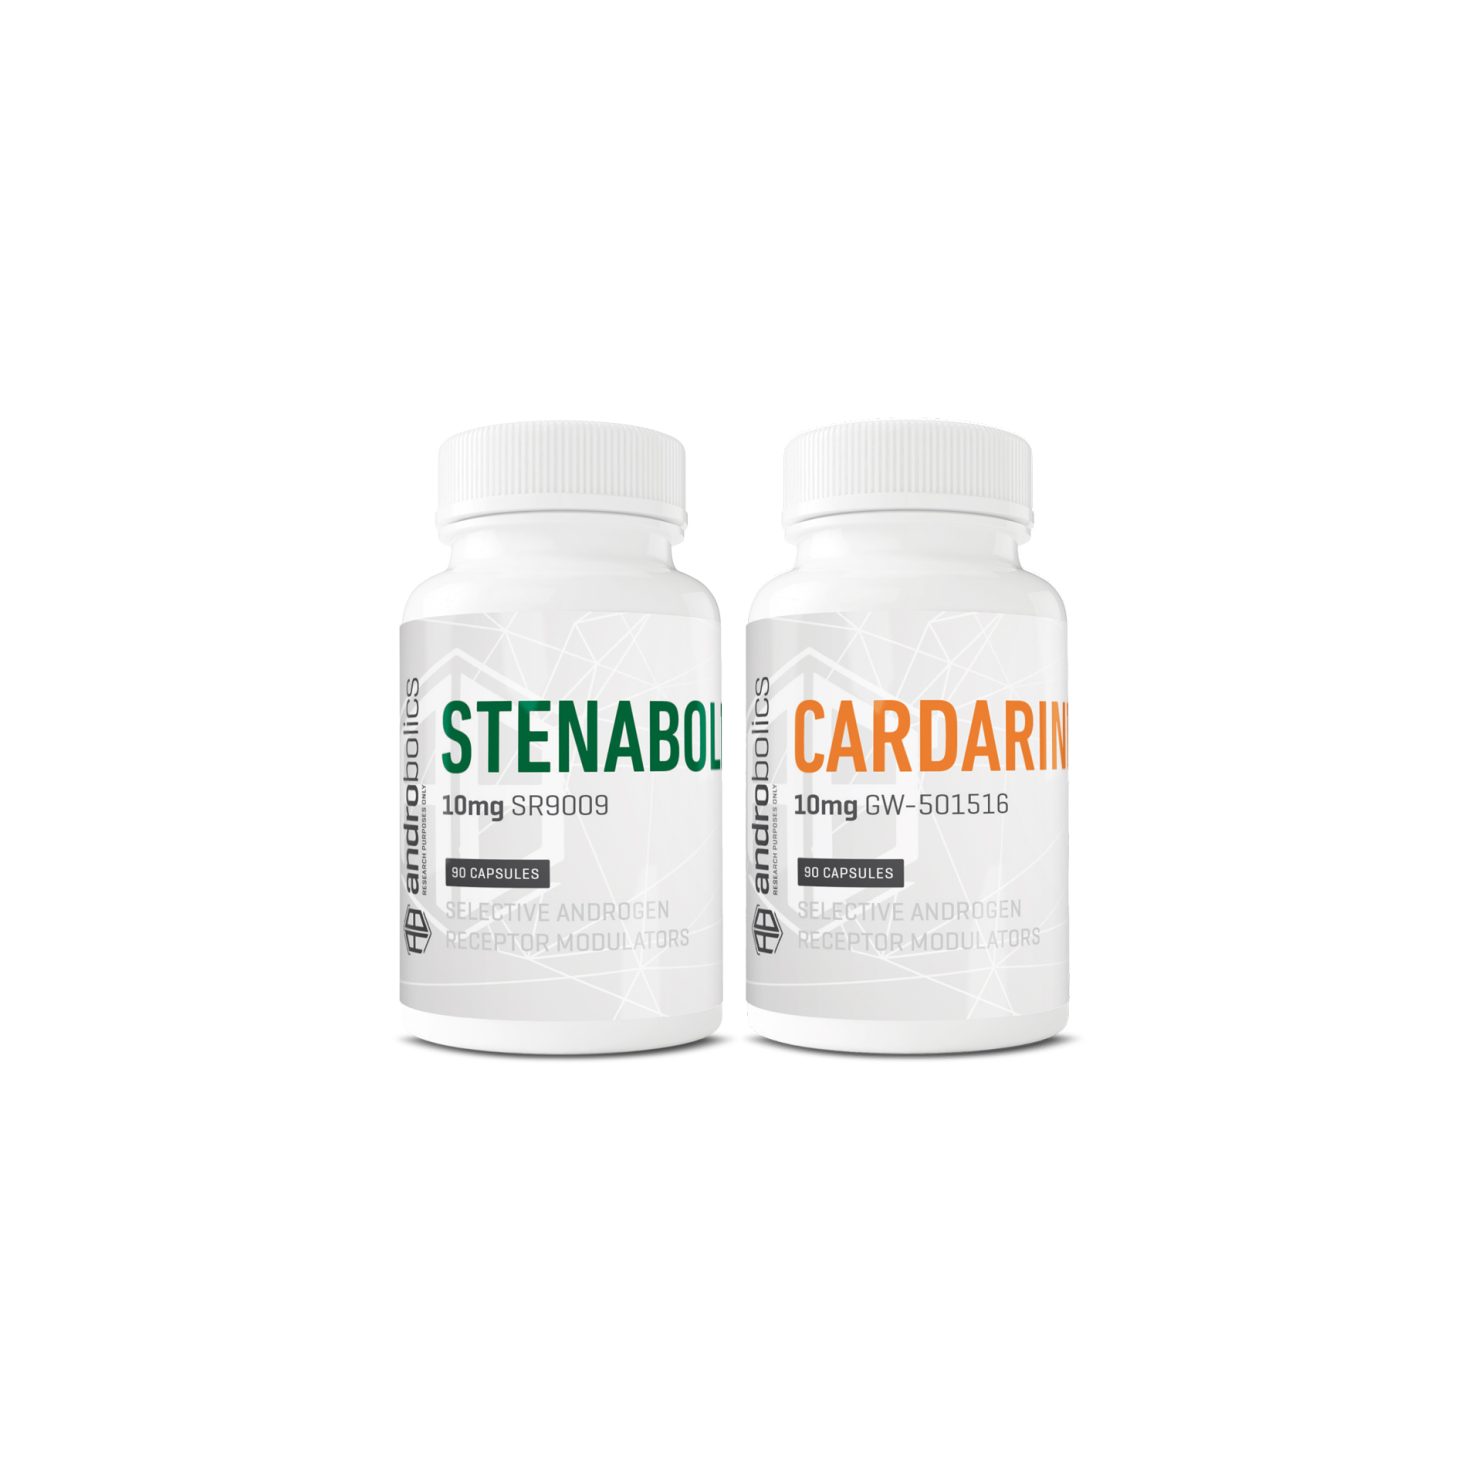 Fat Burning SARMs Stack with Cardarine and Stenabolic bottles from Androbolics